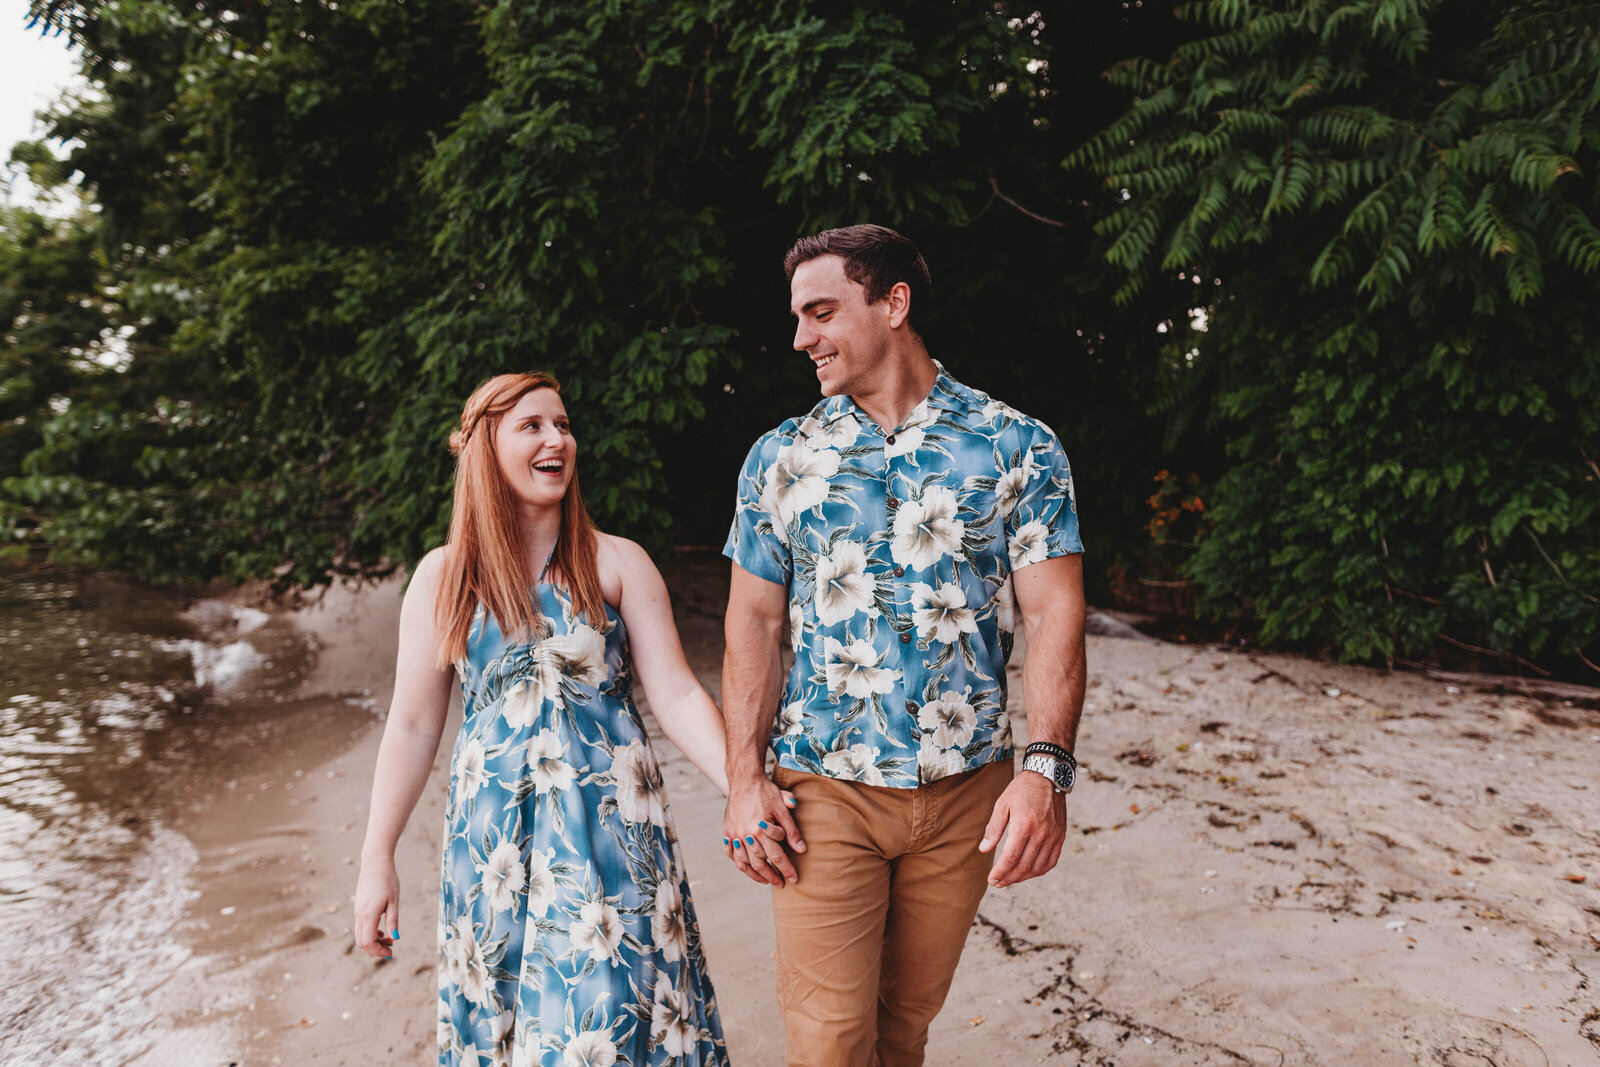 engagement photography in St. Michaels, Maryland on a beach with floral prints and love in the air